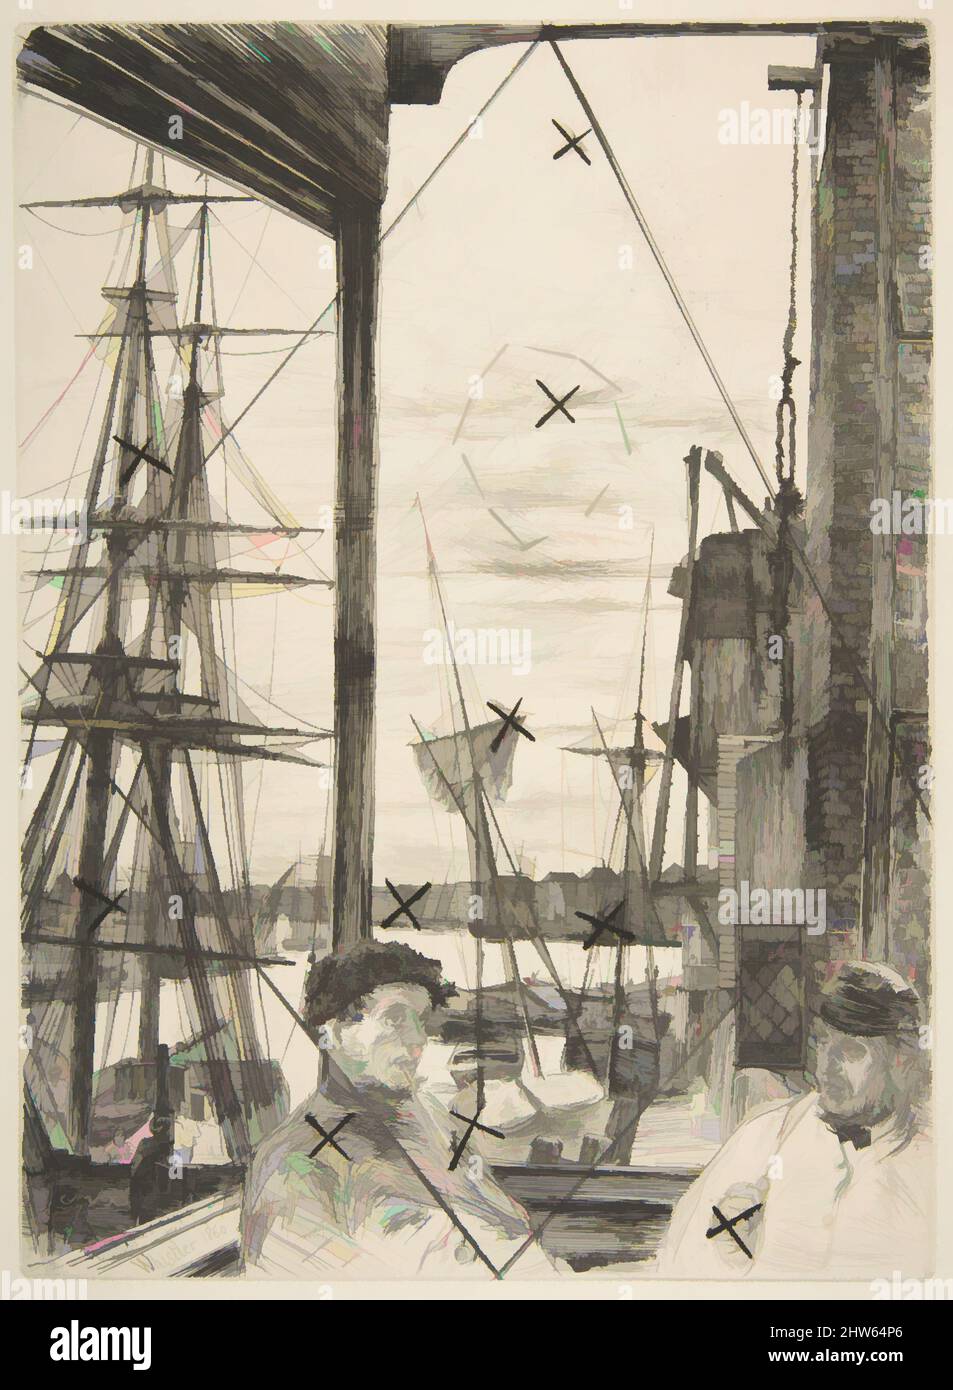 Art inspired by Rotherhithe (Wapping), 1860, Etching and drypoint; sixth state of six, from the cancelled plate, printed in black ink on thick ivory laid paper, plate: 10 13/16 x 7 13/16 in. (27.5 x 19.8 cm), Prints, James McNeill Whistler (American, Lowell, Massachusetts 1834–1903, Classic works modernized by Artotop with a splash of modernity. Shapes, color and value, eye-catching visual impact on art. Emotions through freedom of artworks in a contemporary way. A timeless message pursuing a wildly creative new direction. Artists turning to the digital medium and creating the Artotop NFT Stock Photo